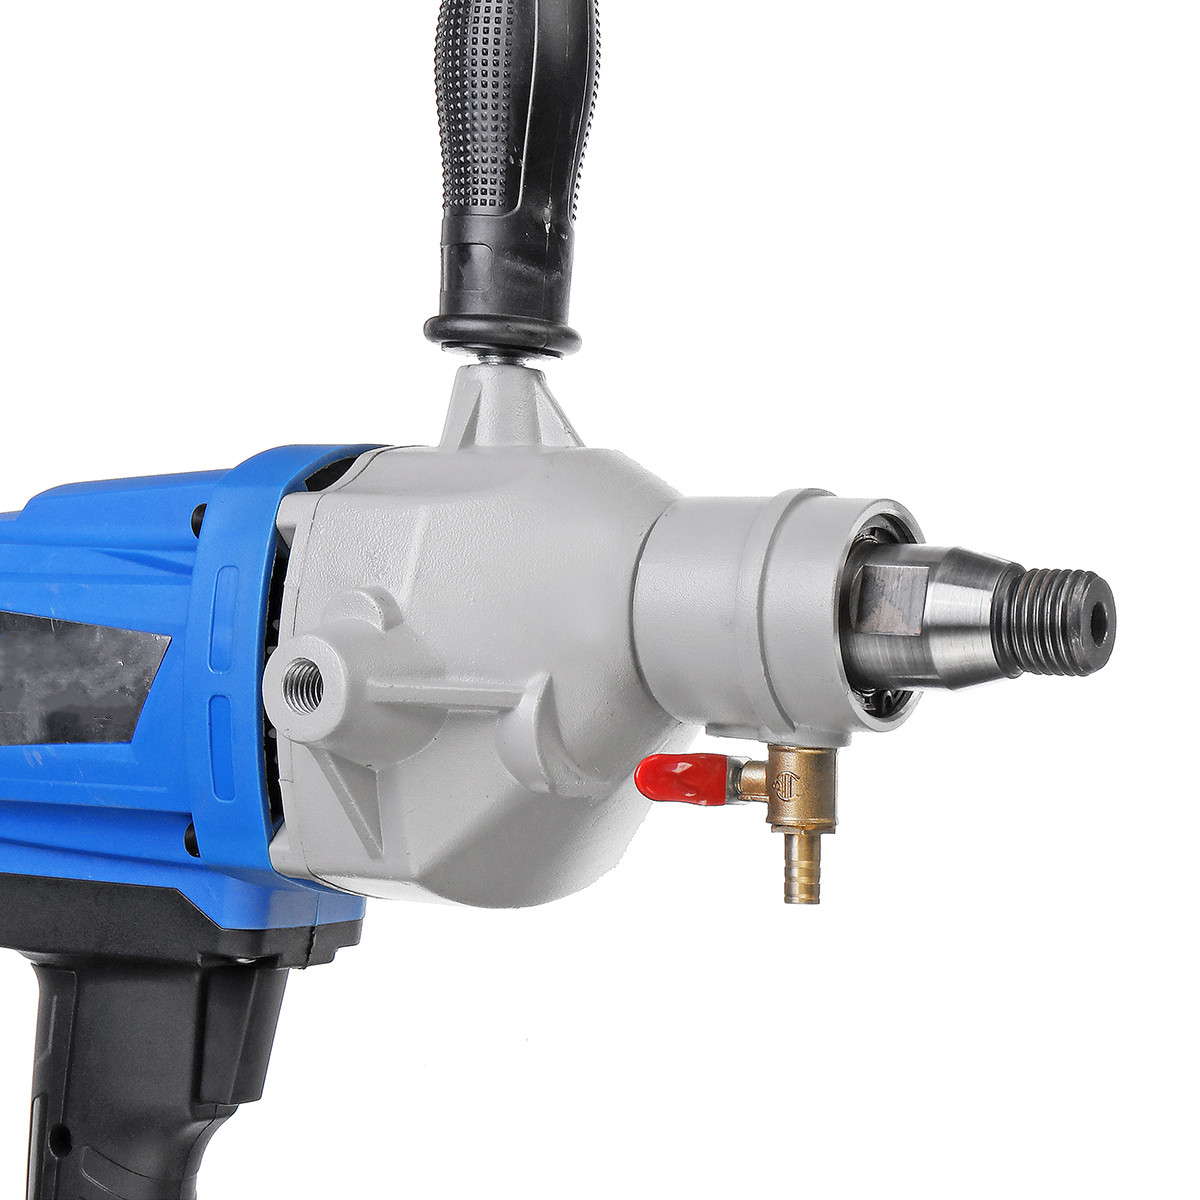 Newest 1900W 118mm Diamond Core Drill 220V Wet Handheld Concrete Core Drilling Machine with Water Pump Accessories Power Tools